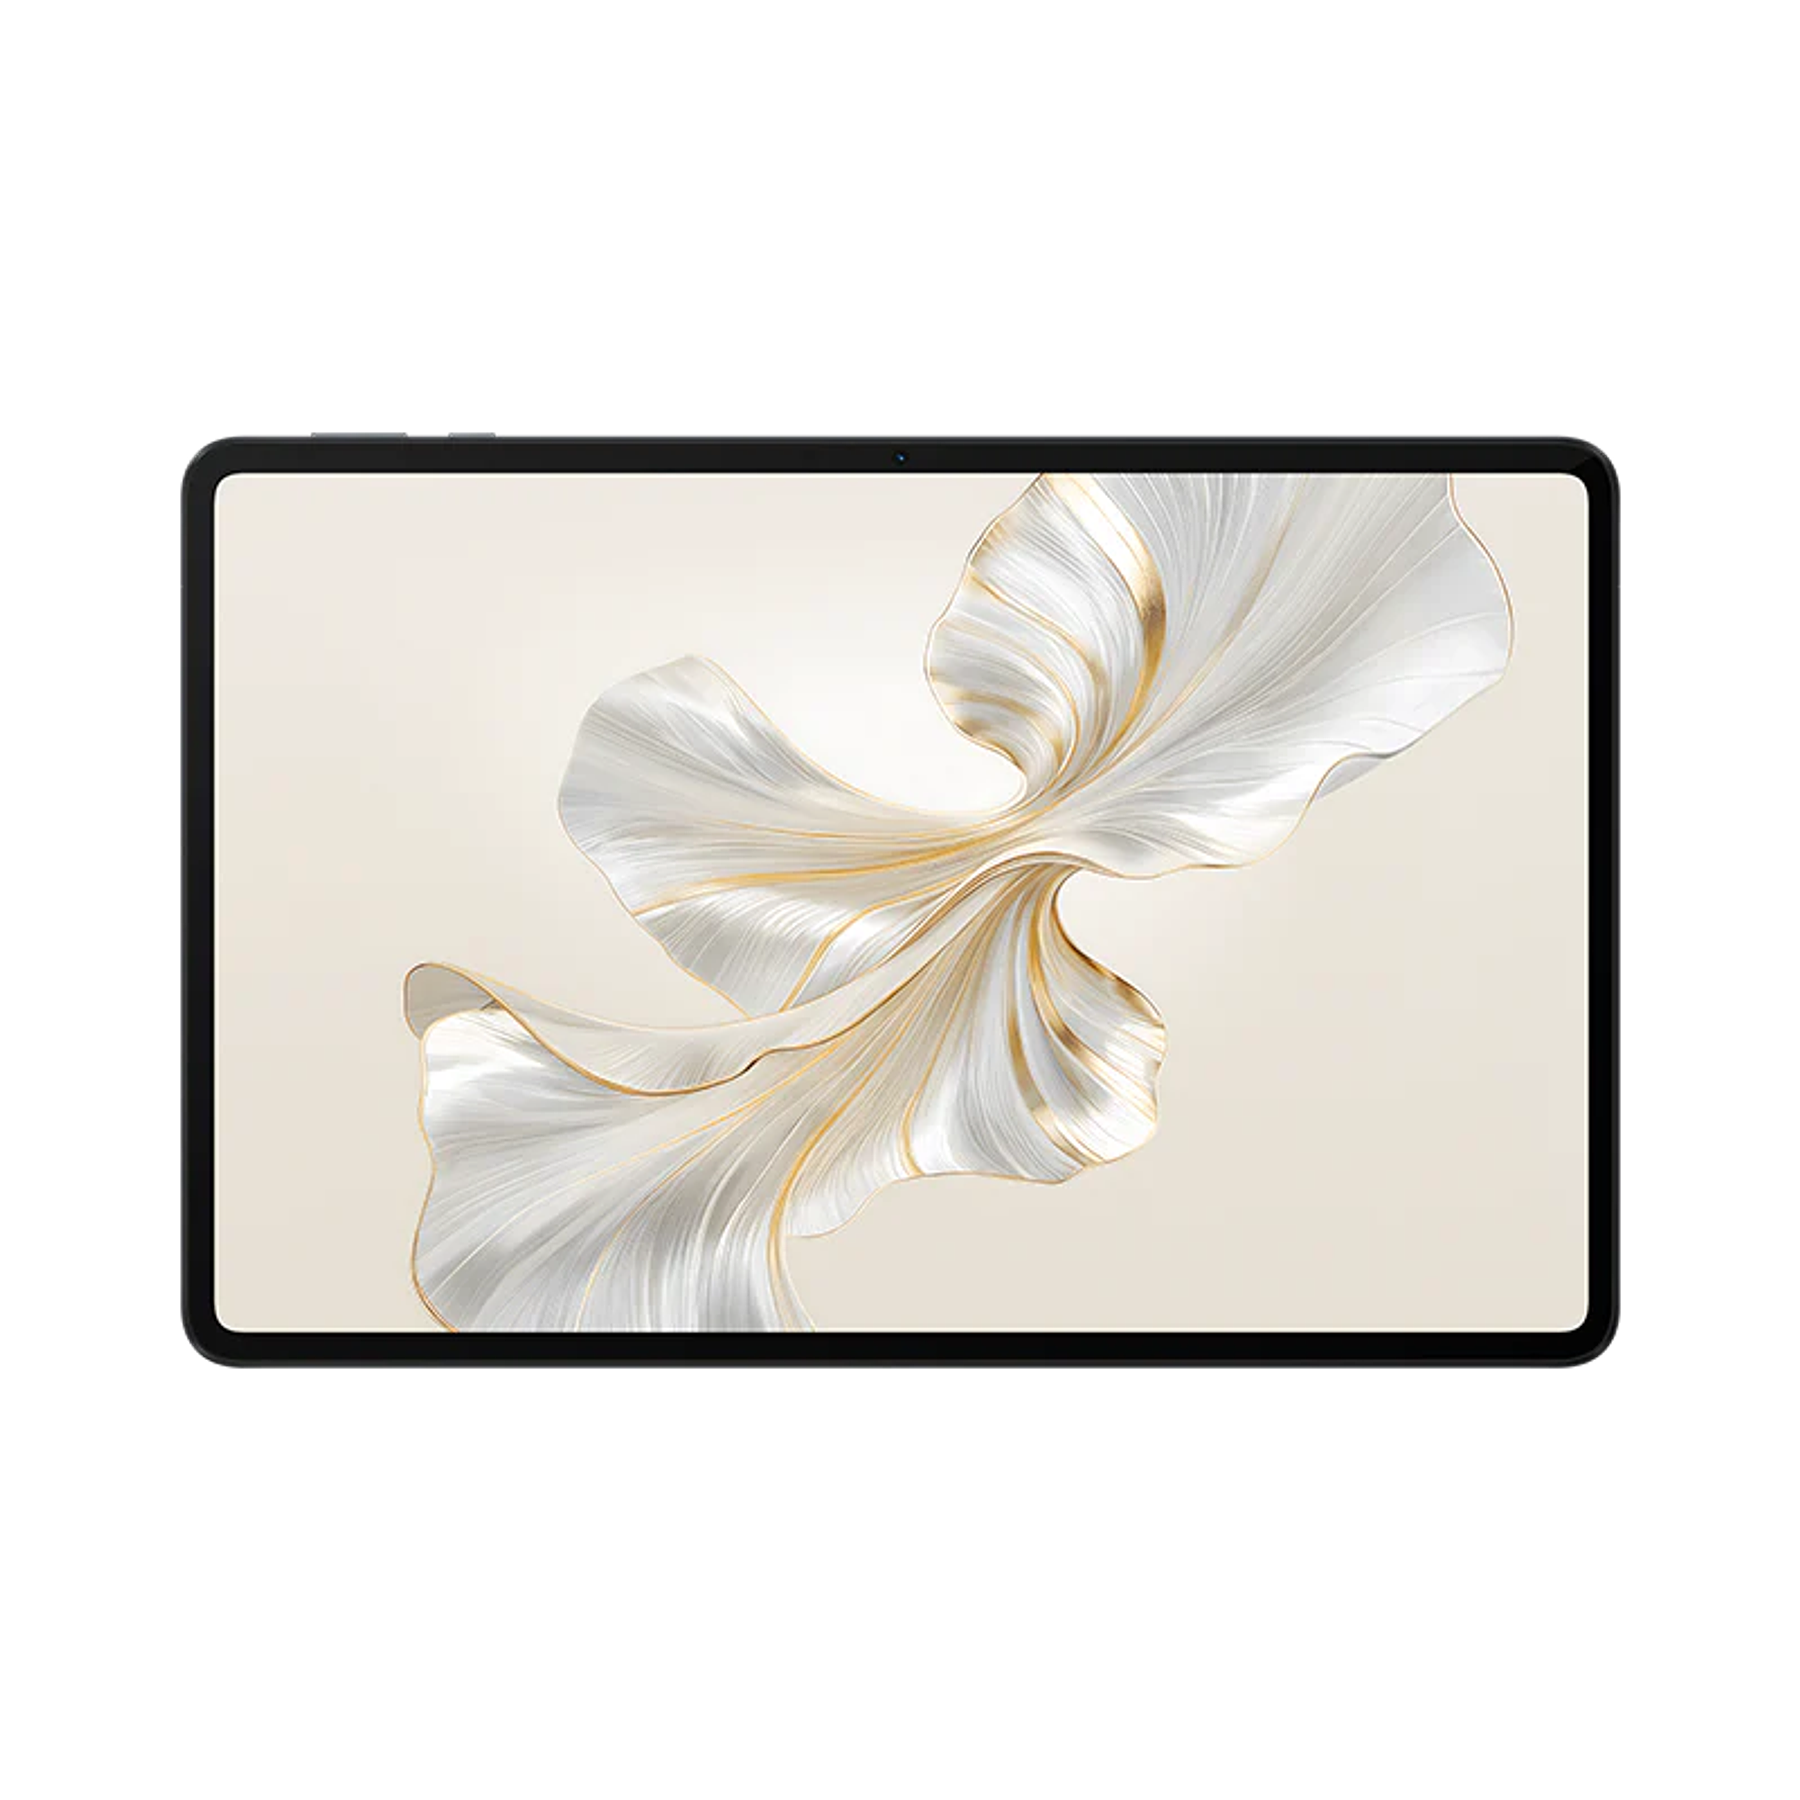 Honor Pad 9 Tablet Color Negro